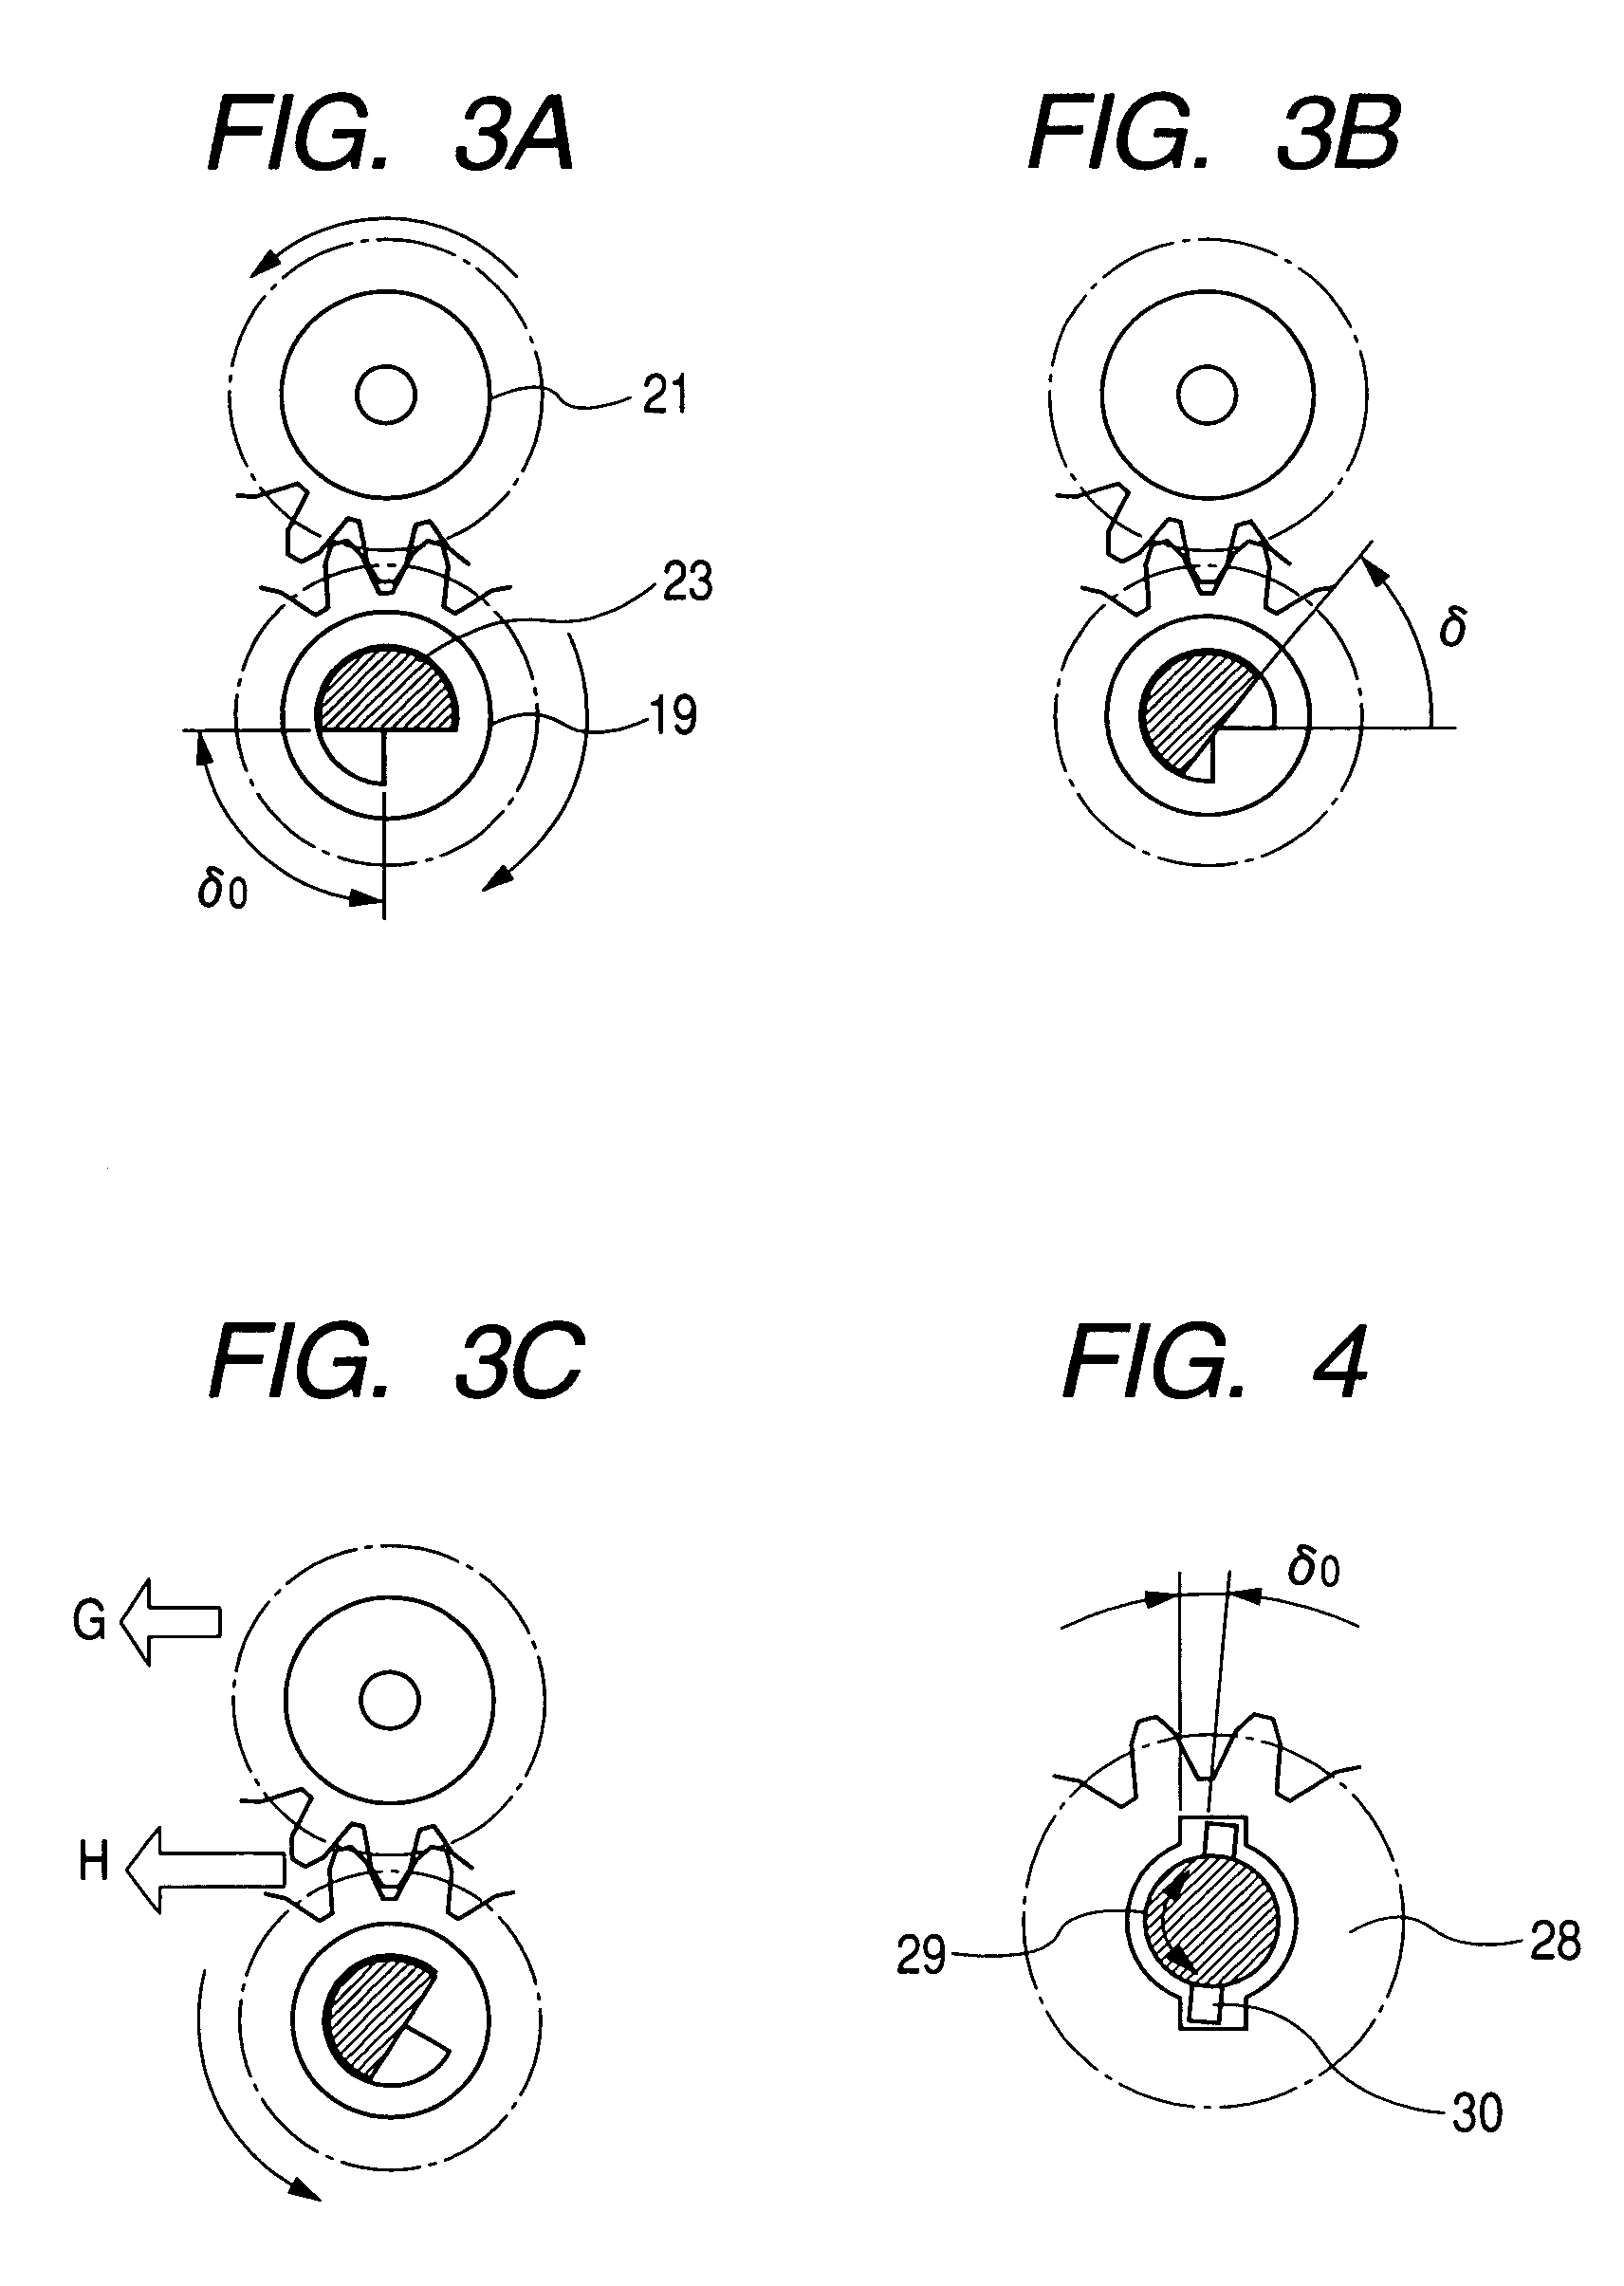 Image forming apparatus including drive transmission member including gears and shafts